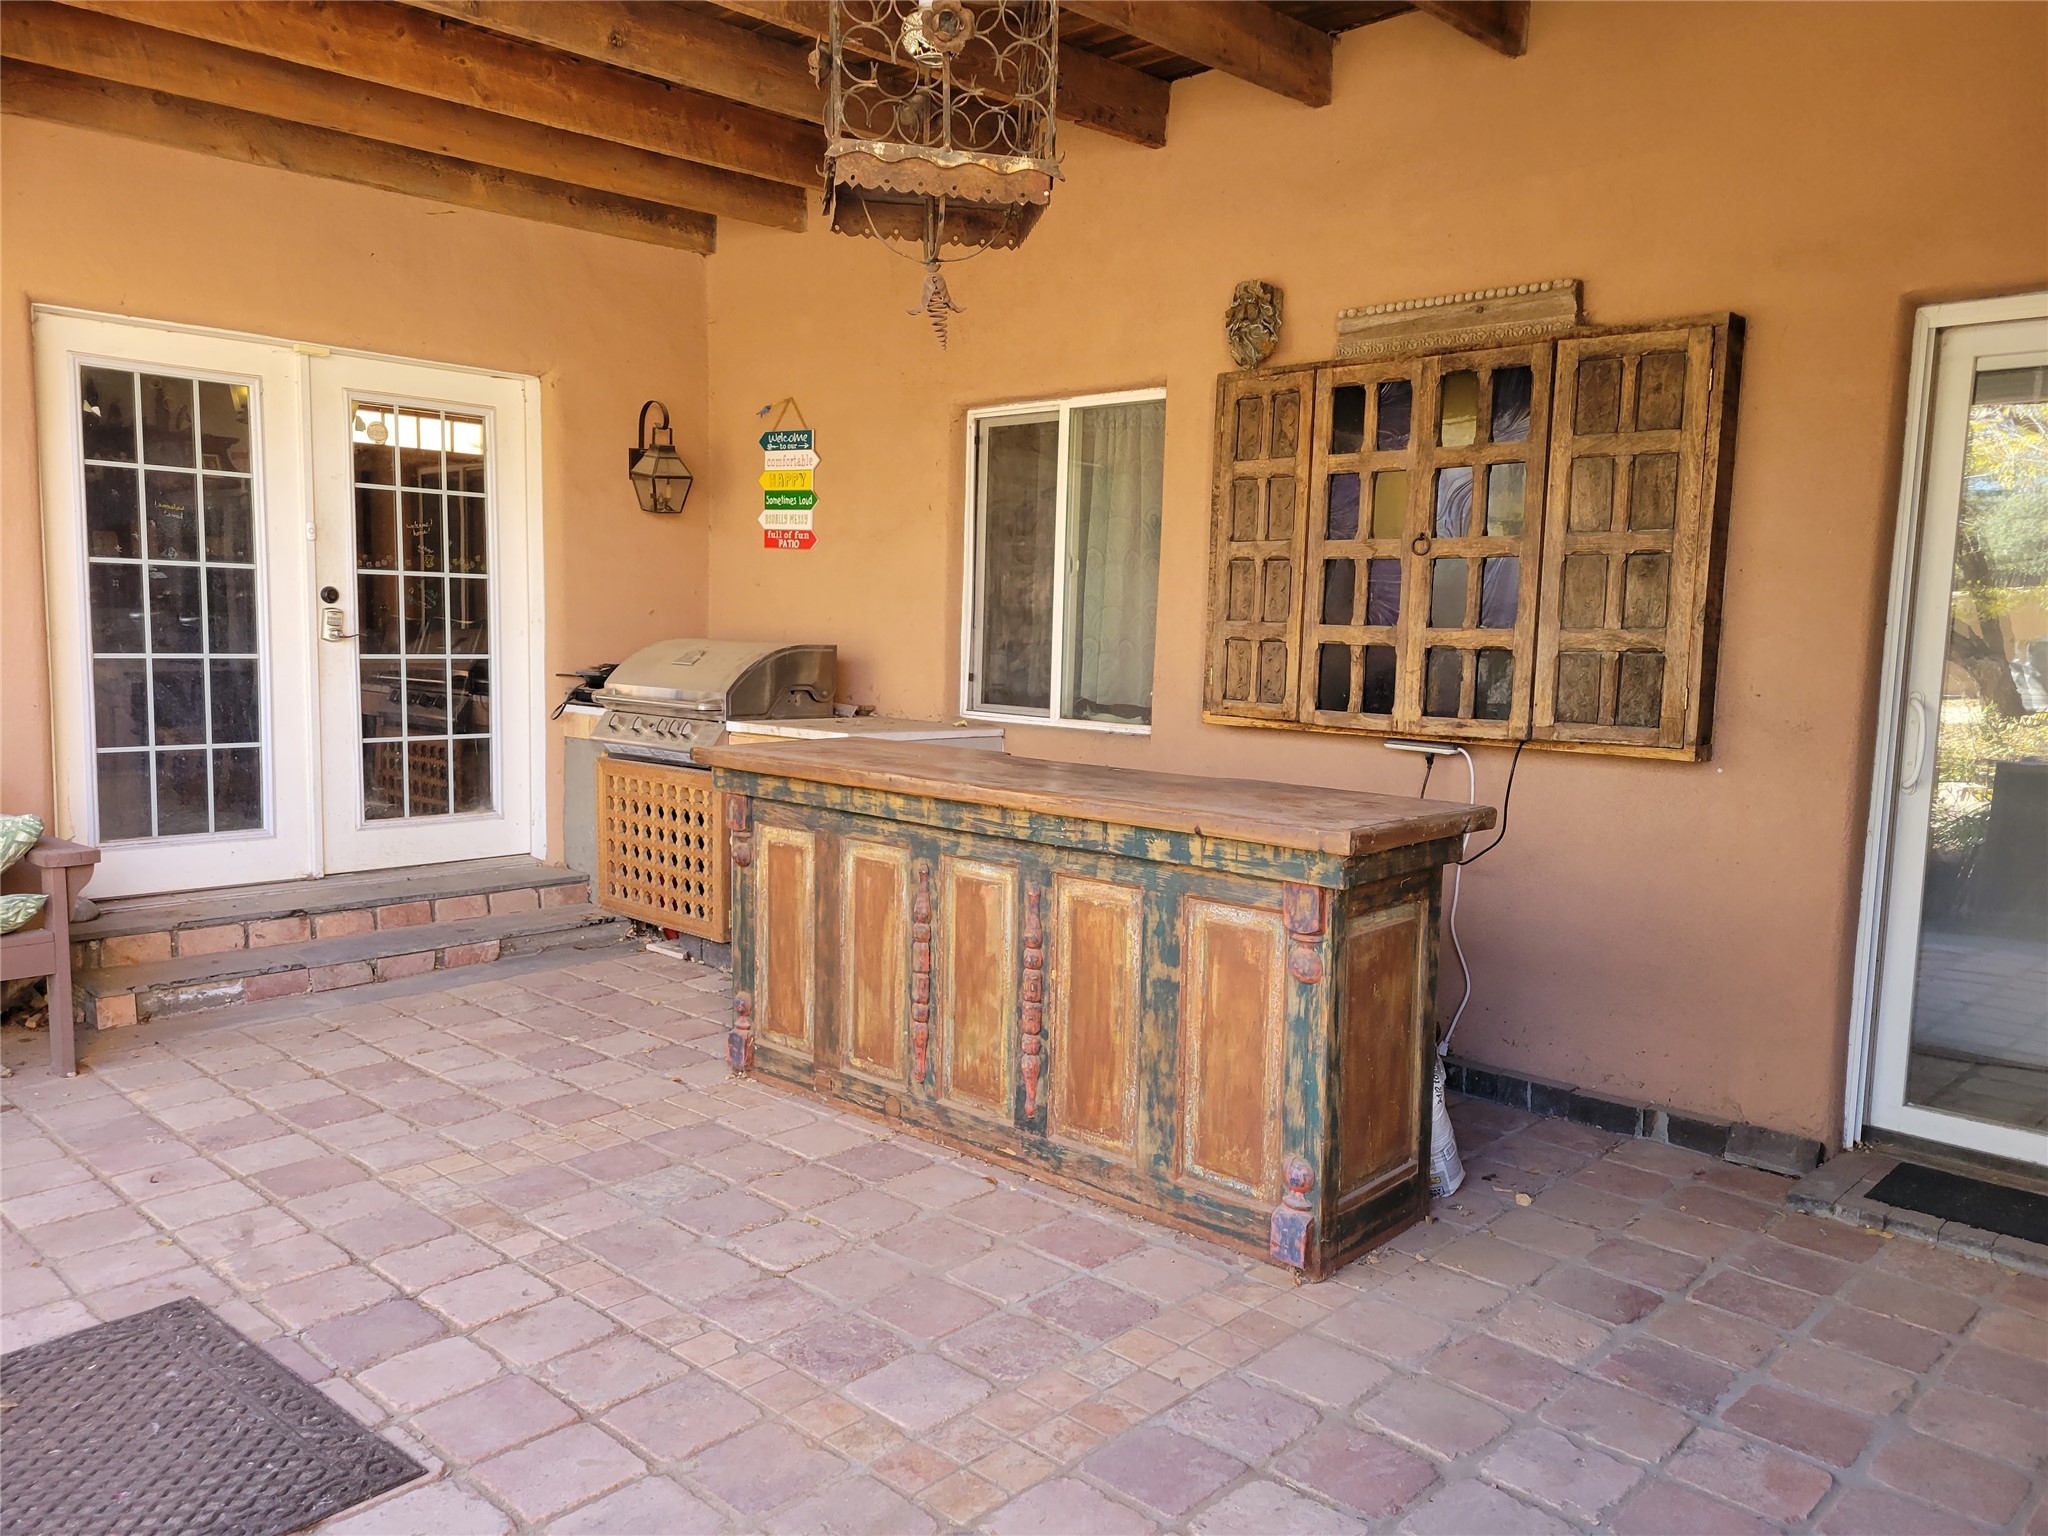 309 E Berger Street, Santa Fe, New Mexico 87505, 4 Bedrooms Bedrooms, ,2 BathroomsBathrooms,Residential,For Sale,309 E Berger Street,202401117